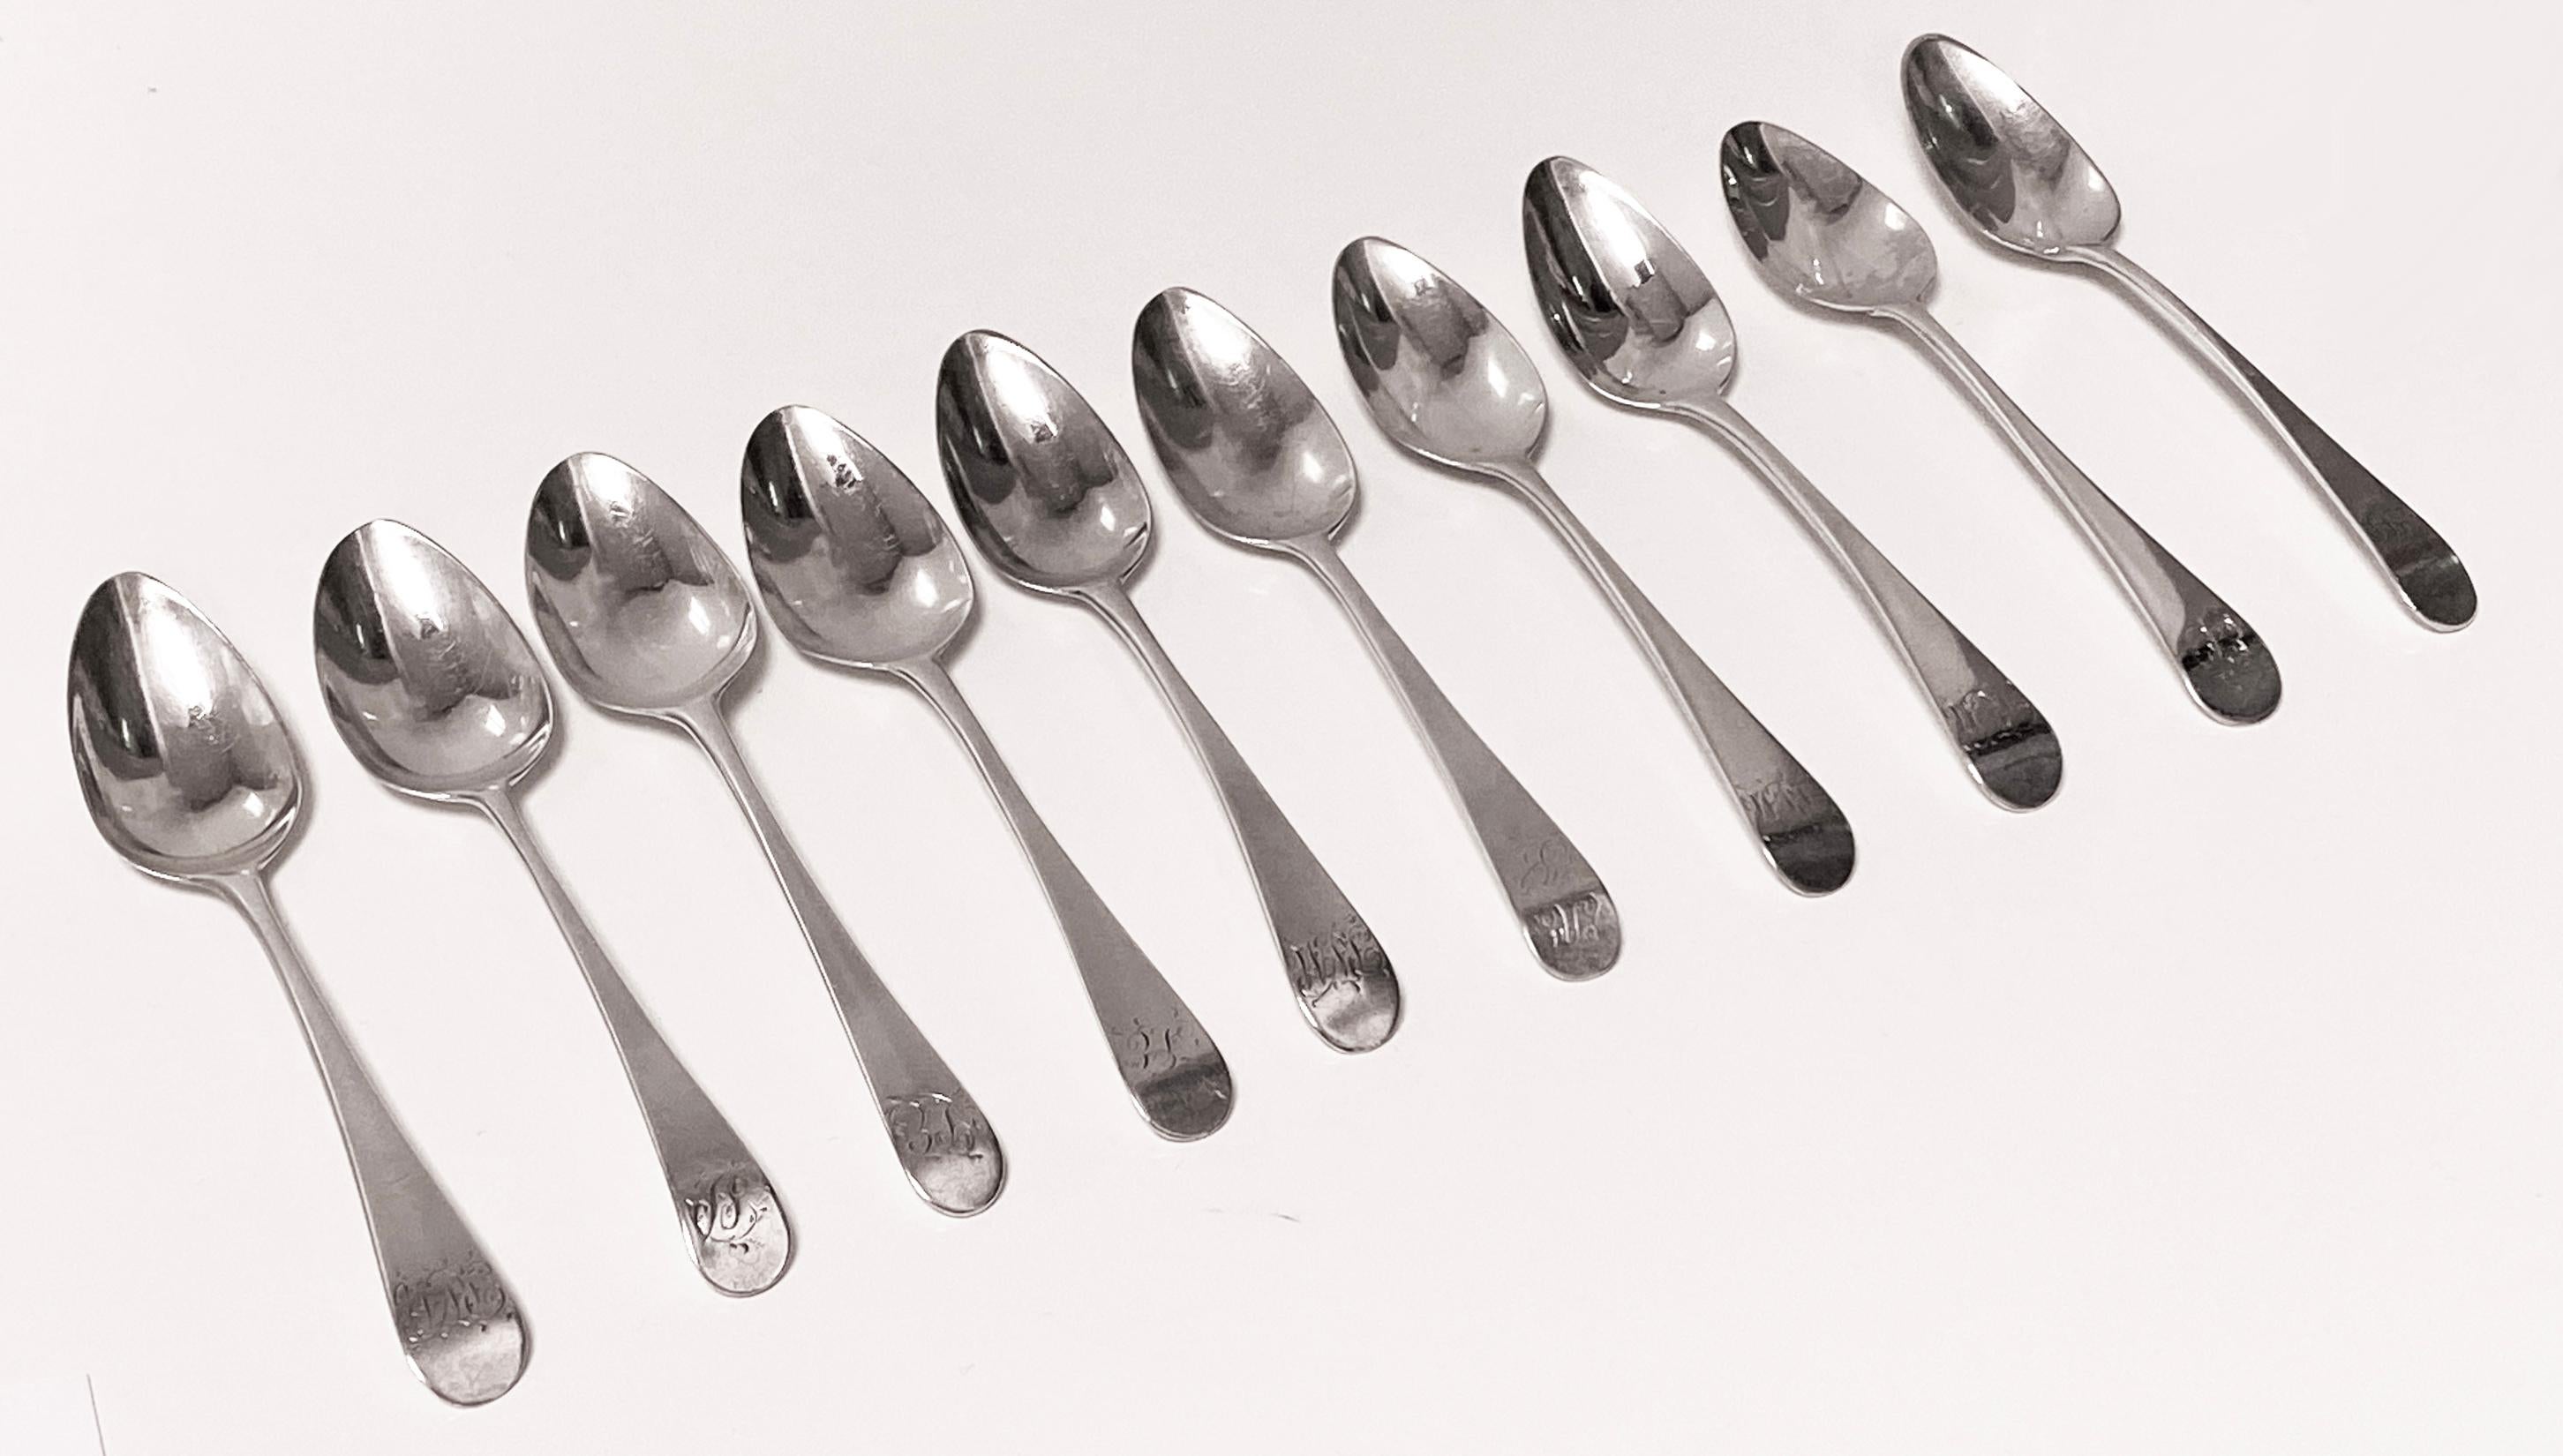 Set 10 Georgian Silver Teaspoons London 1801-13 mixed Peter Ann and William Bateman. Lengths: 5.125 – 5.25 inches. Weight: 146.24 grams. Slightly mixed set with very slight wear commensurate with age, monograms